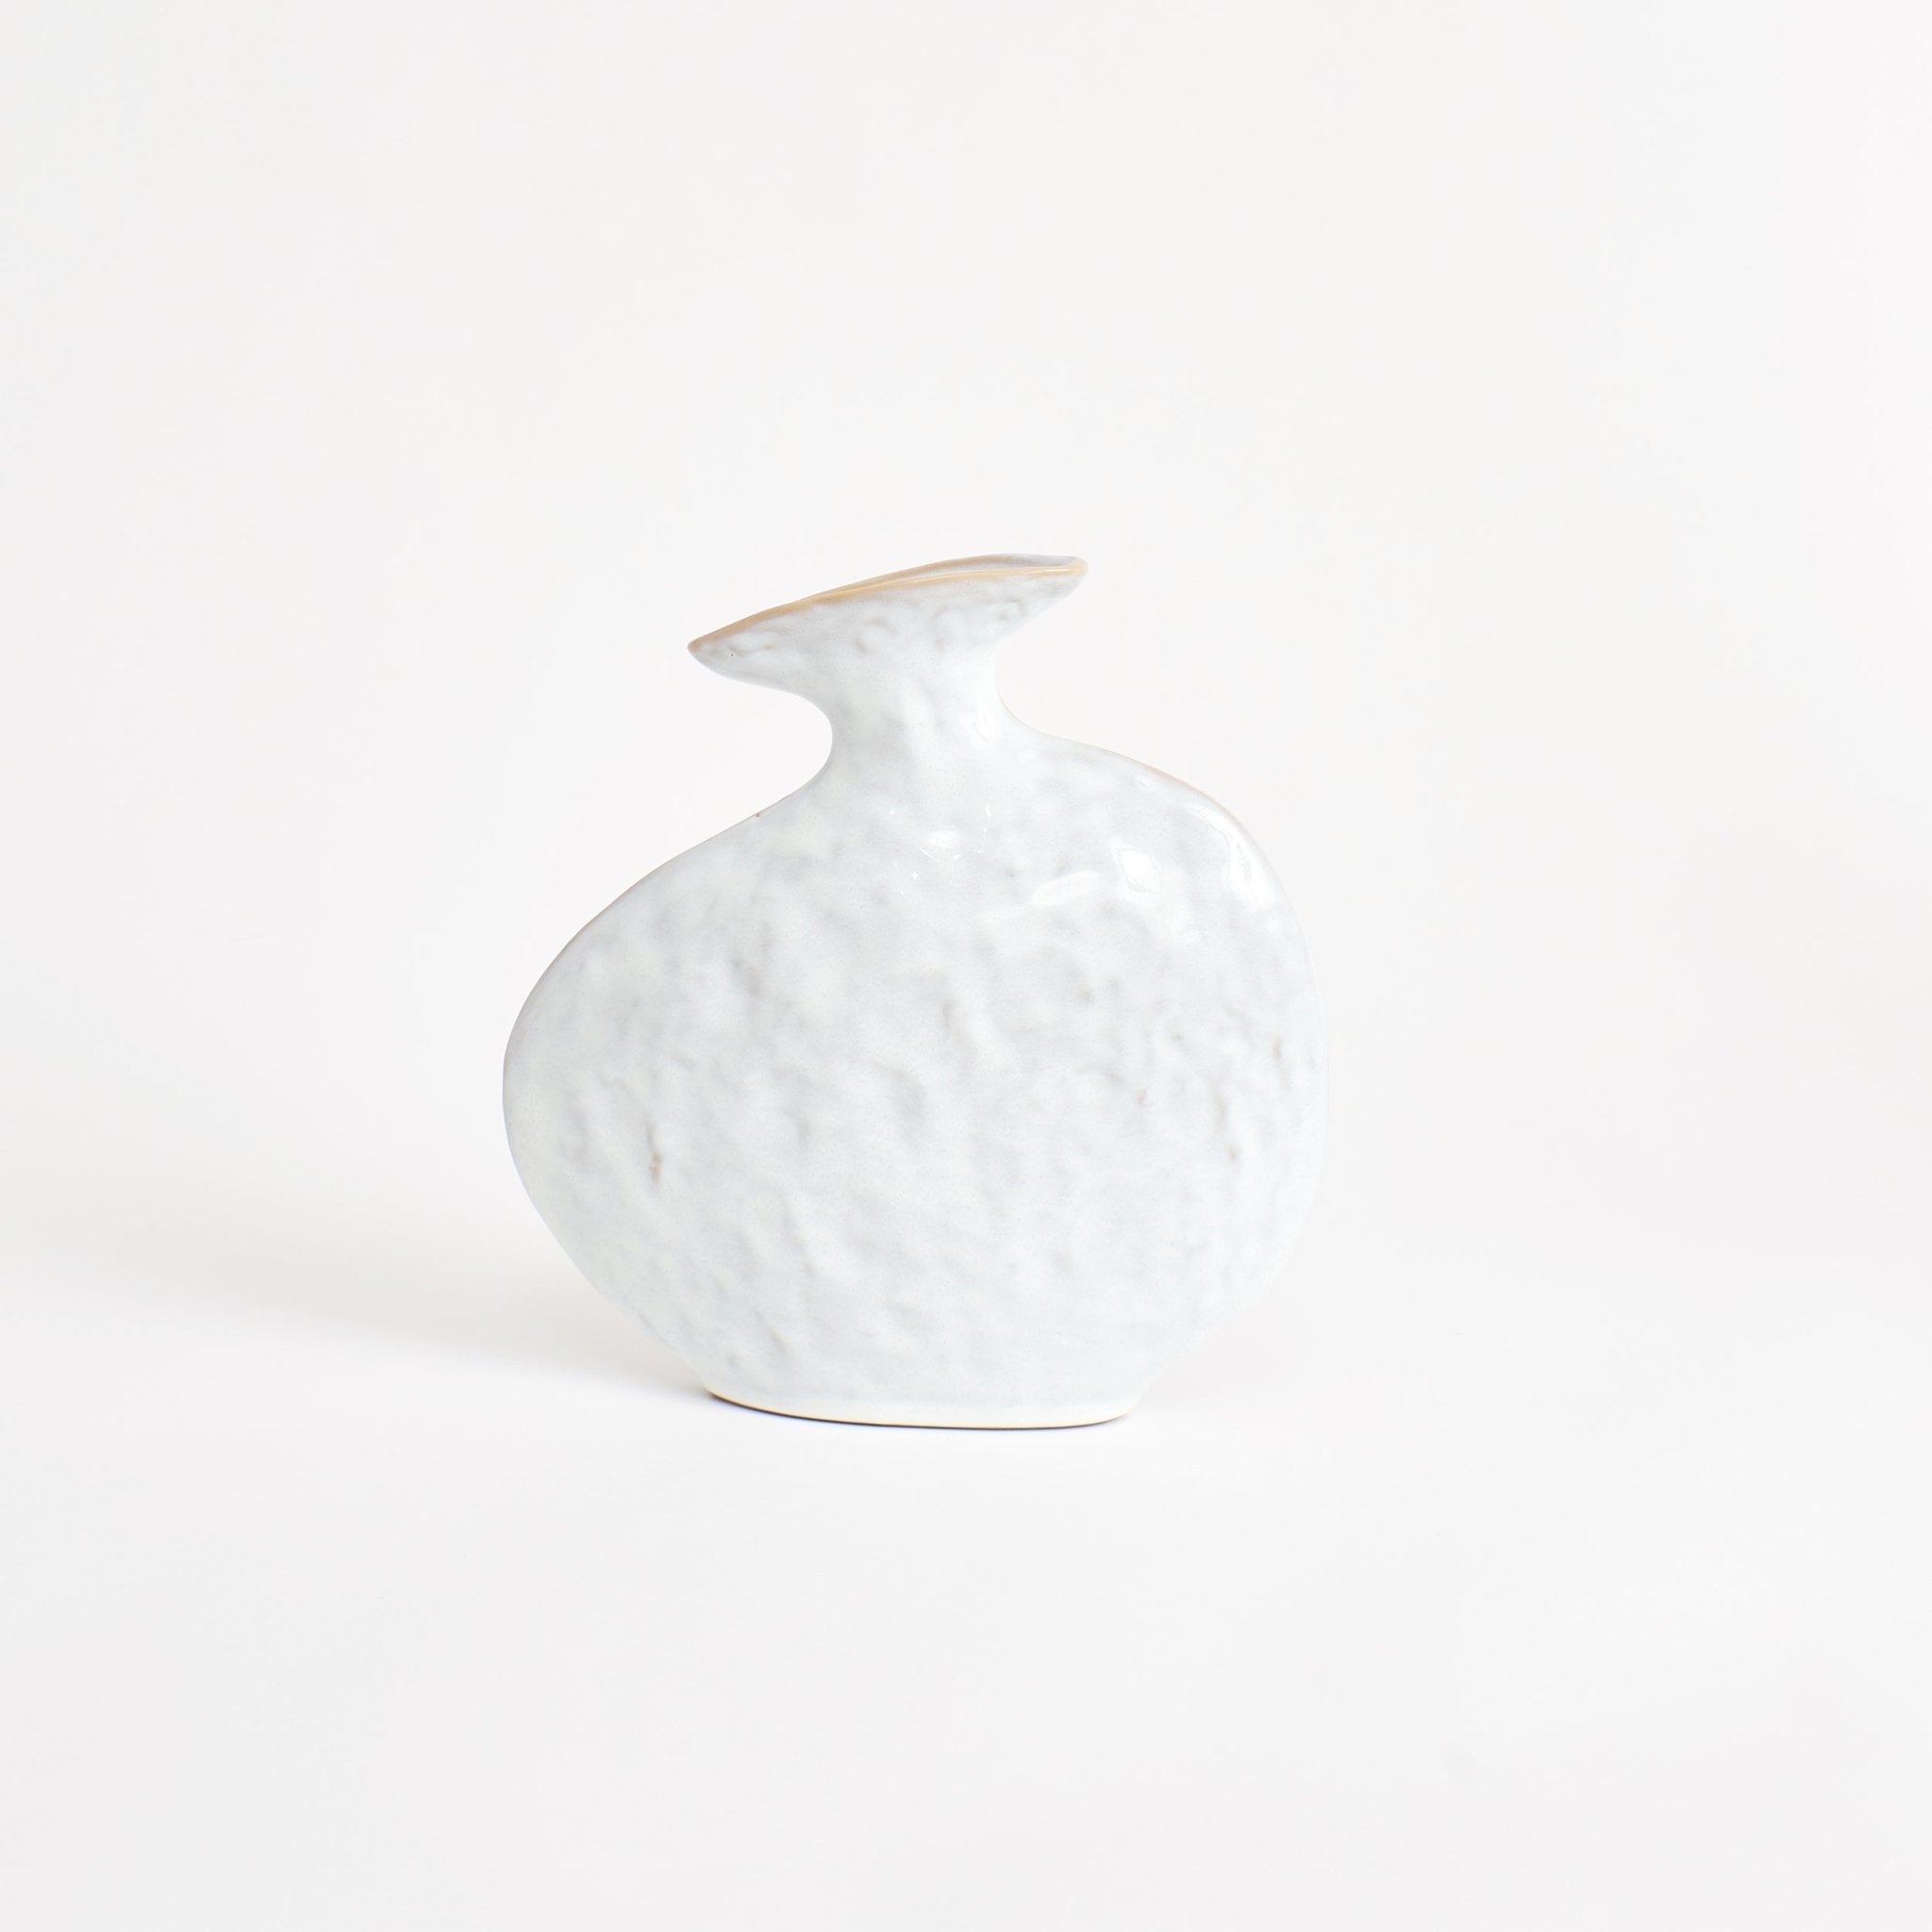 Flat Vase - White vase from Project 213A